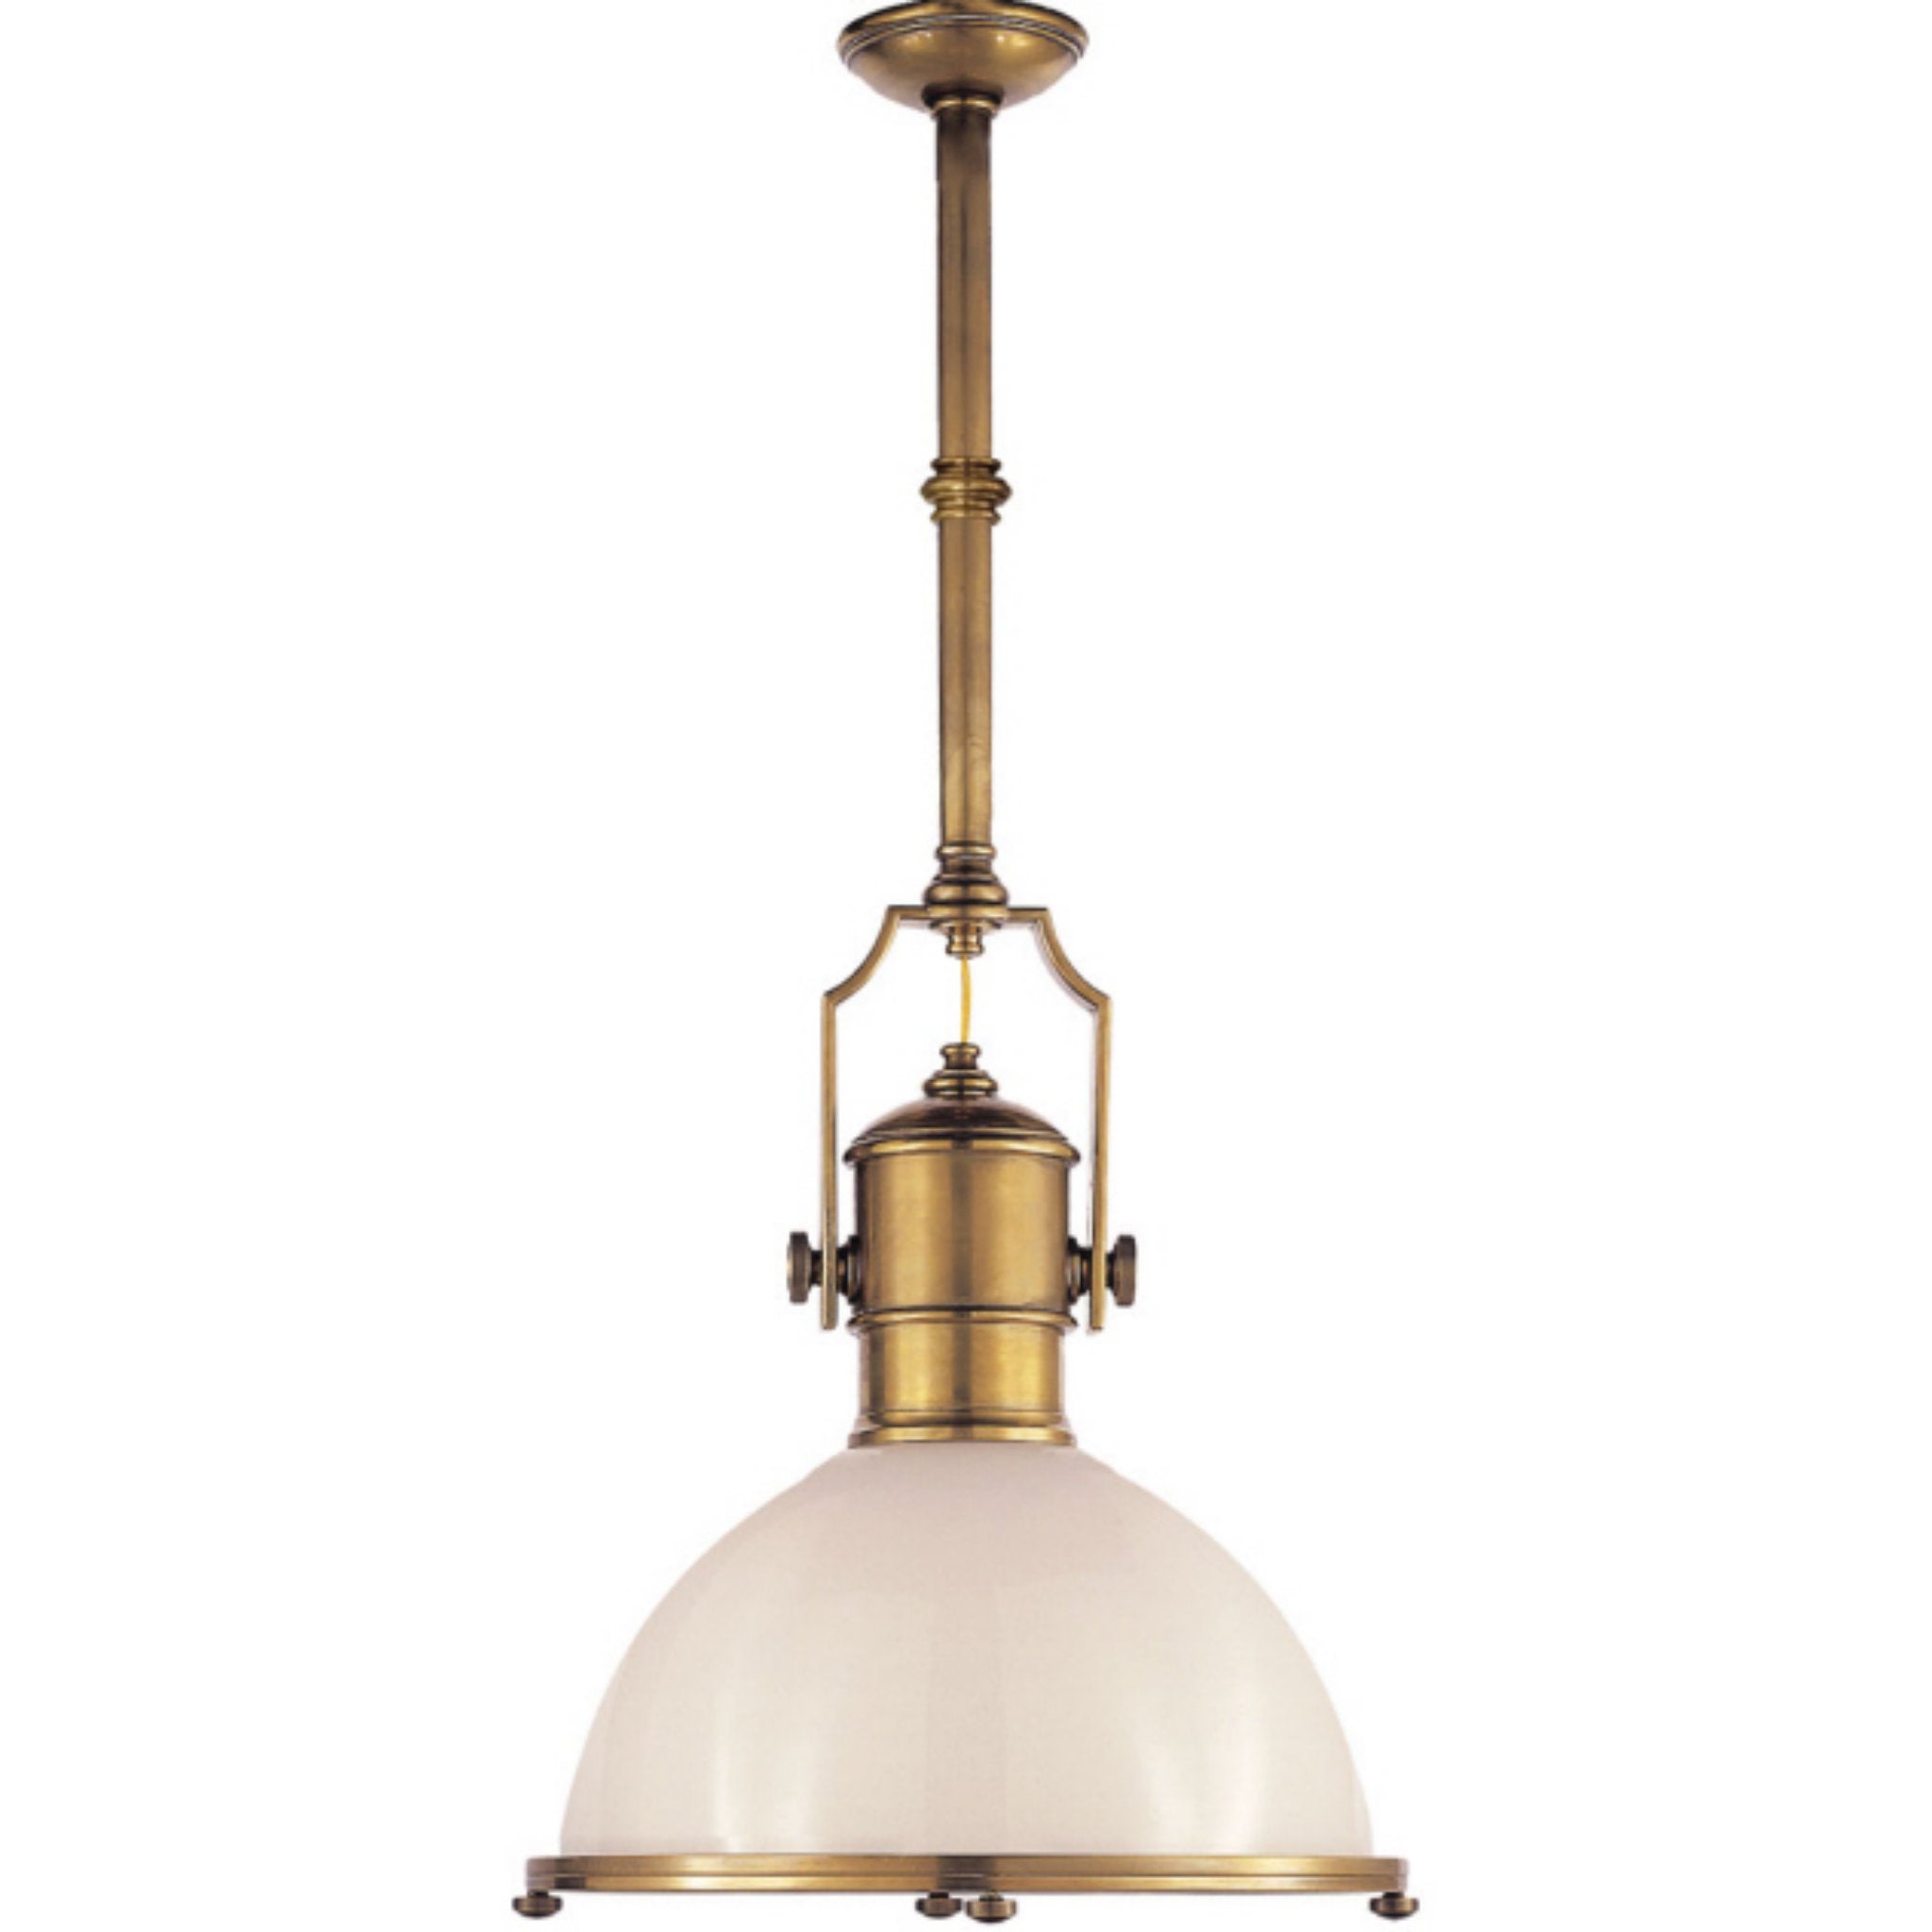 Chapman & Myers Country Industrial Large Pendant in Antique-Burnished Brass with White Glass Shade